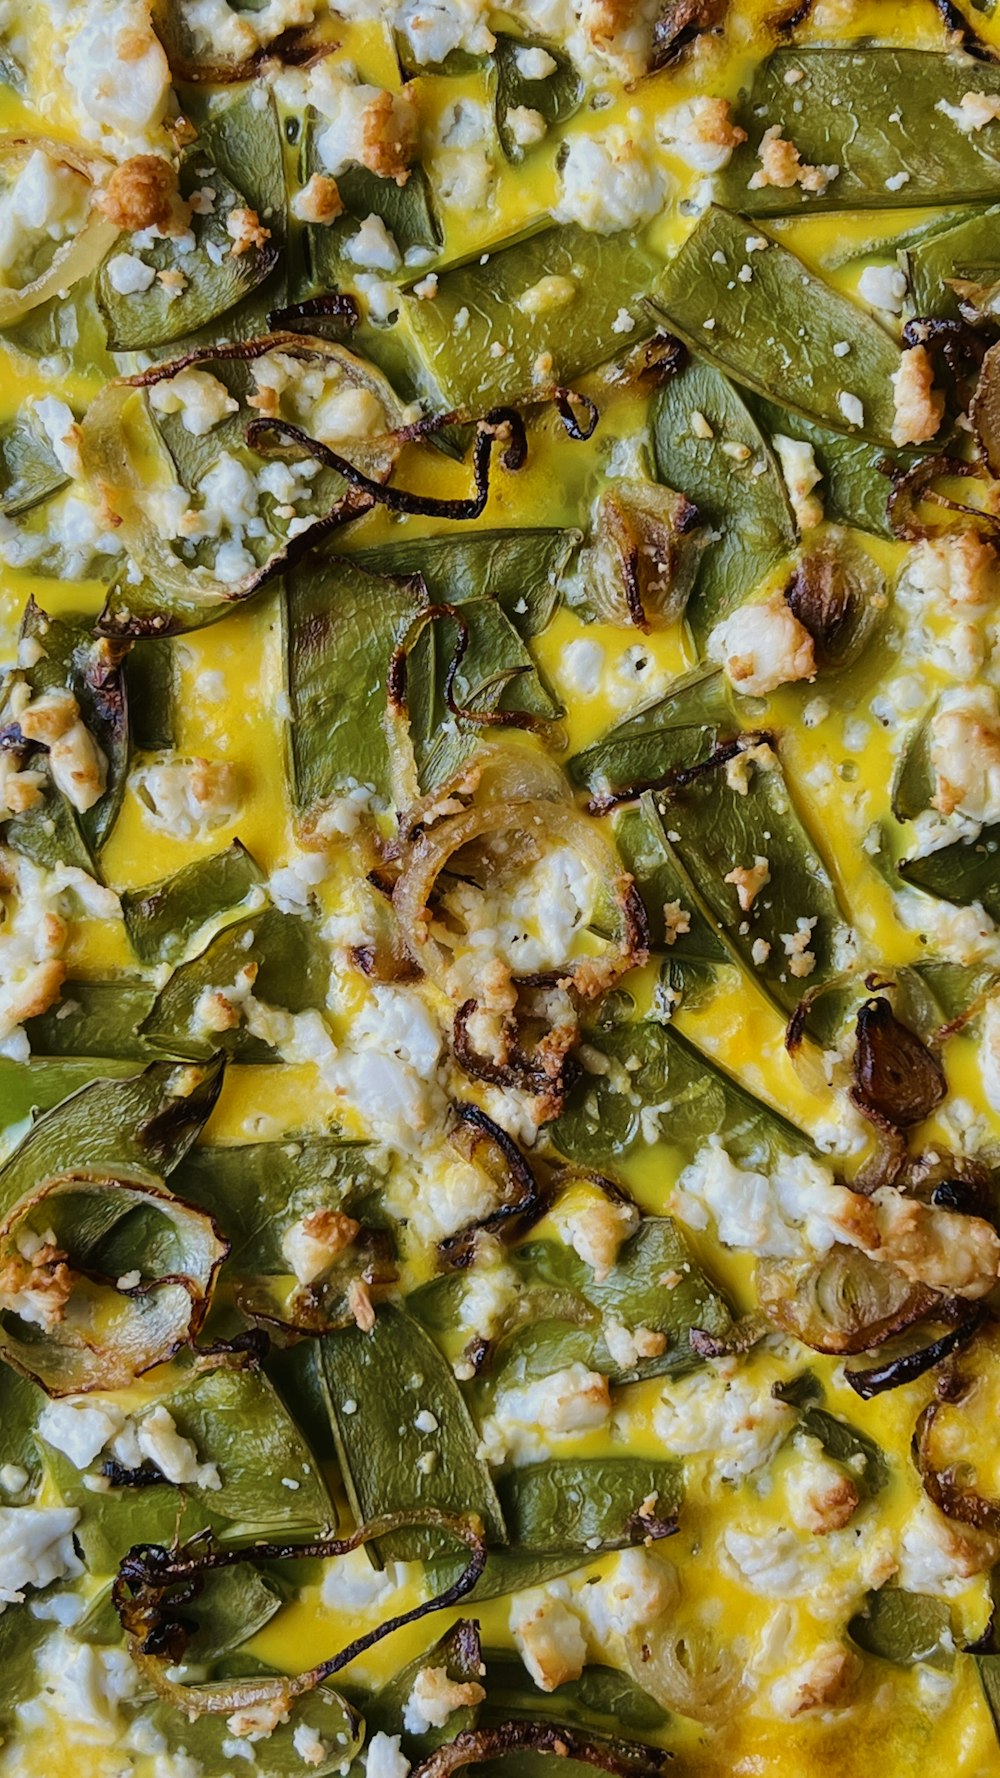 a pizza with cheese, green peppers, and other toppings